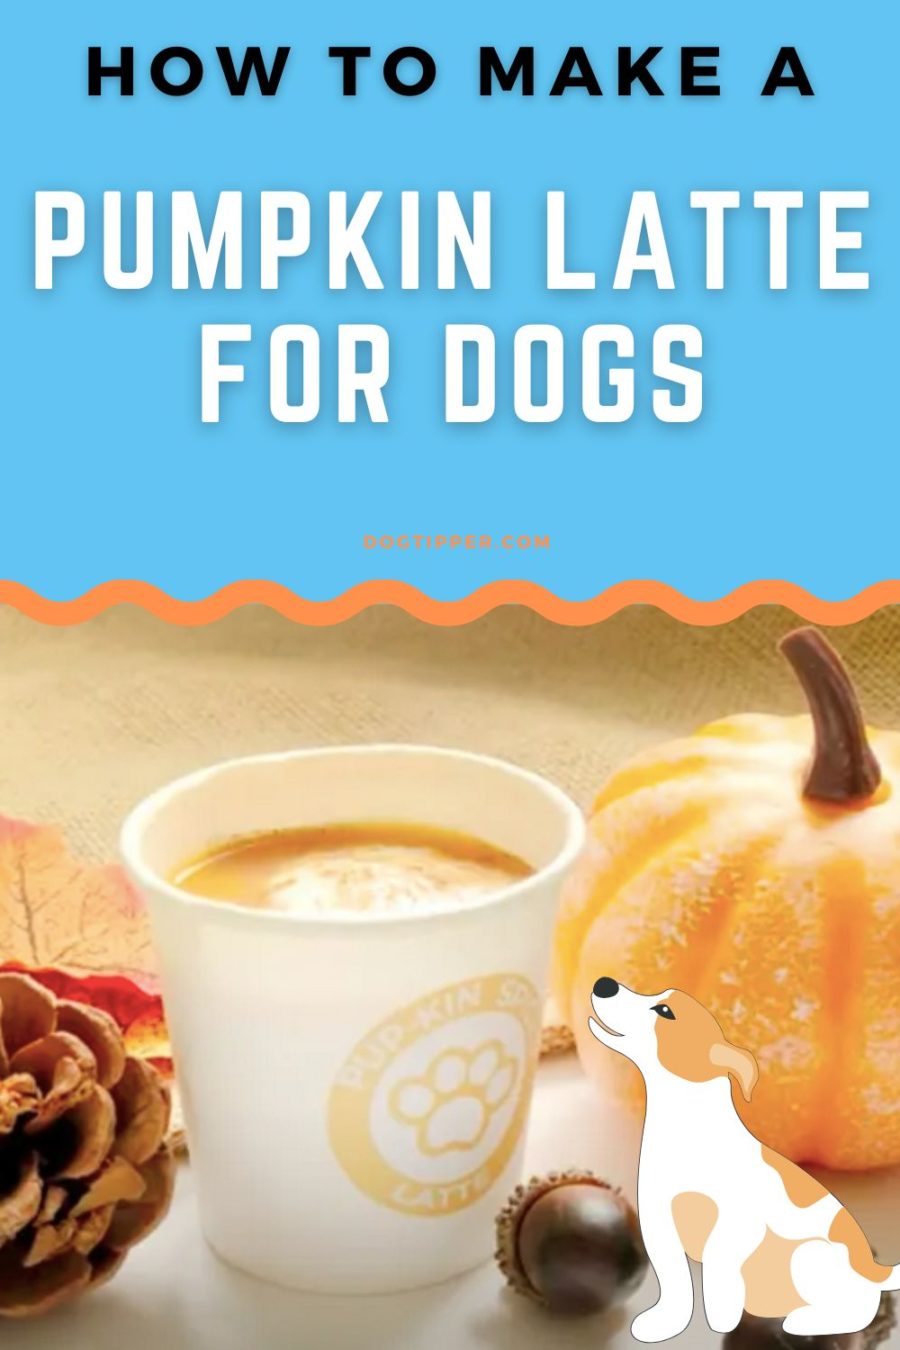 How to make a pumpkin latte for dogs